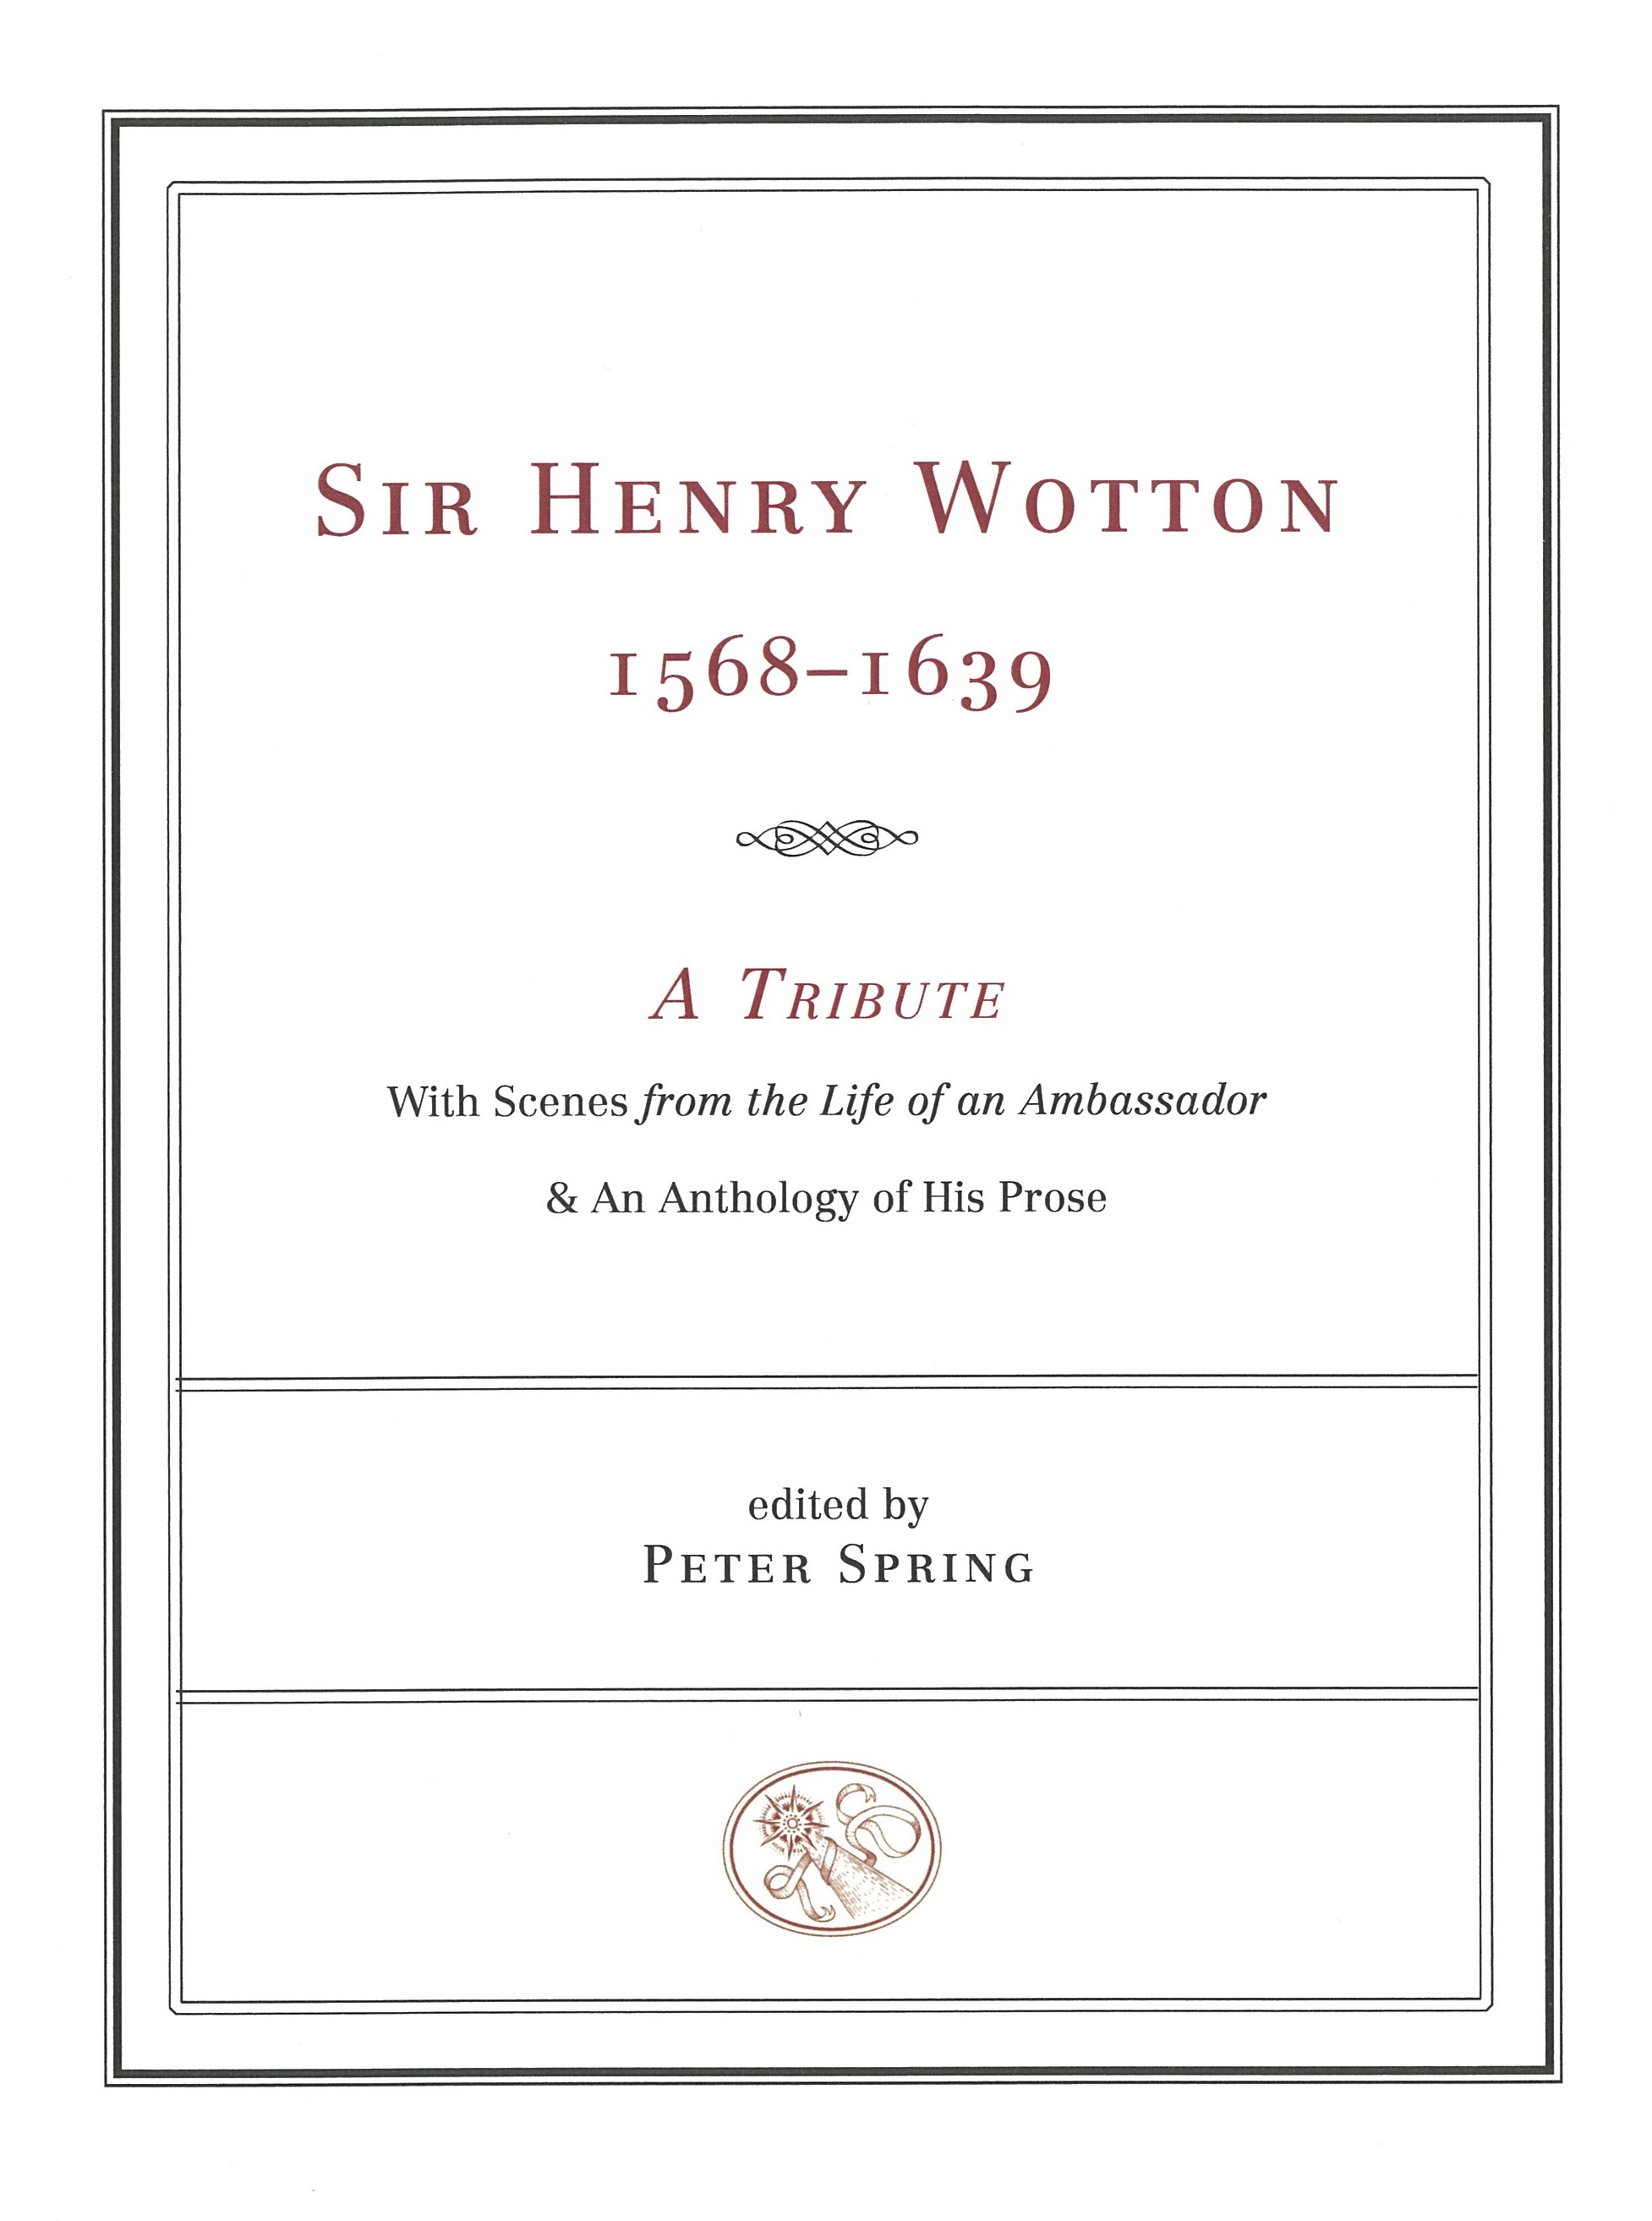 SIR HENRY WOTTON a tribute